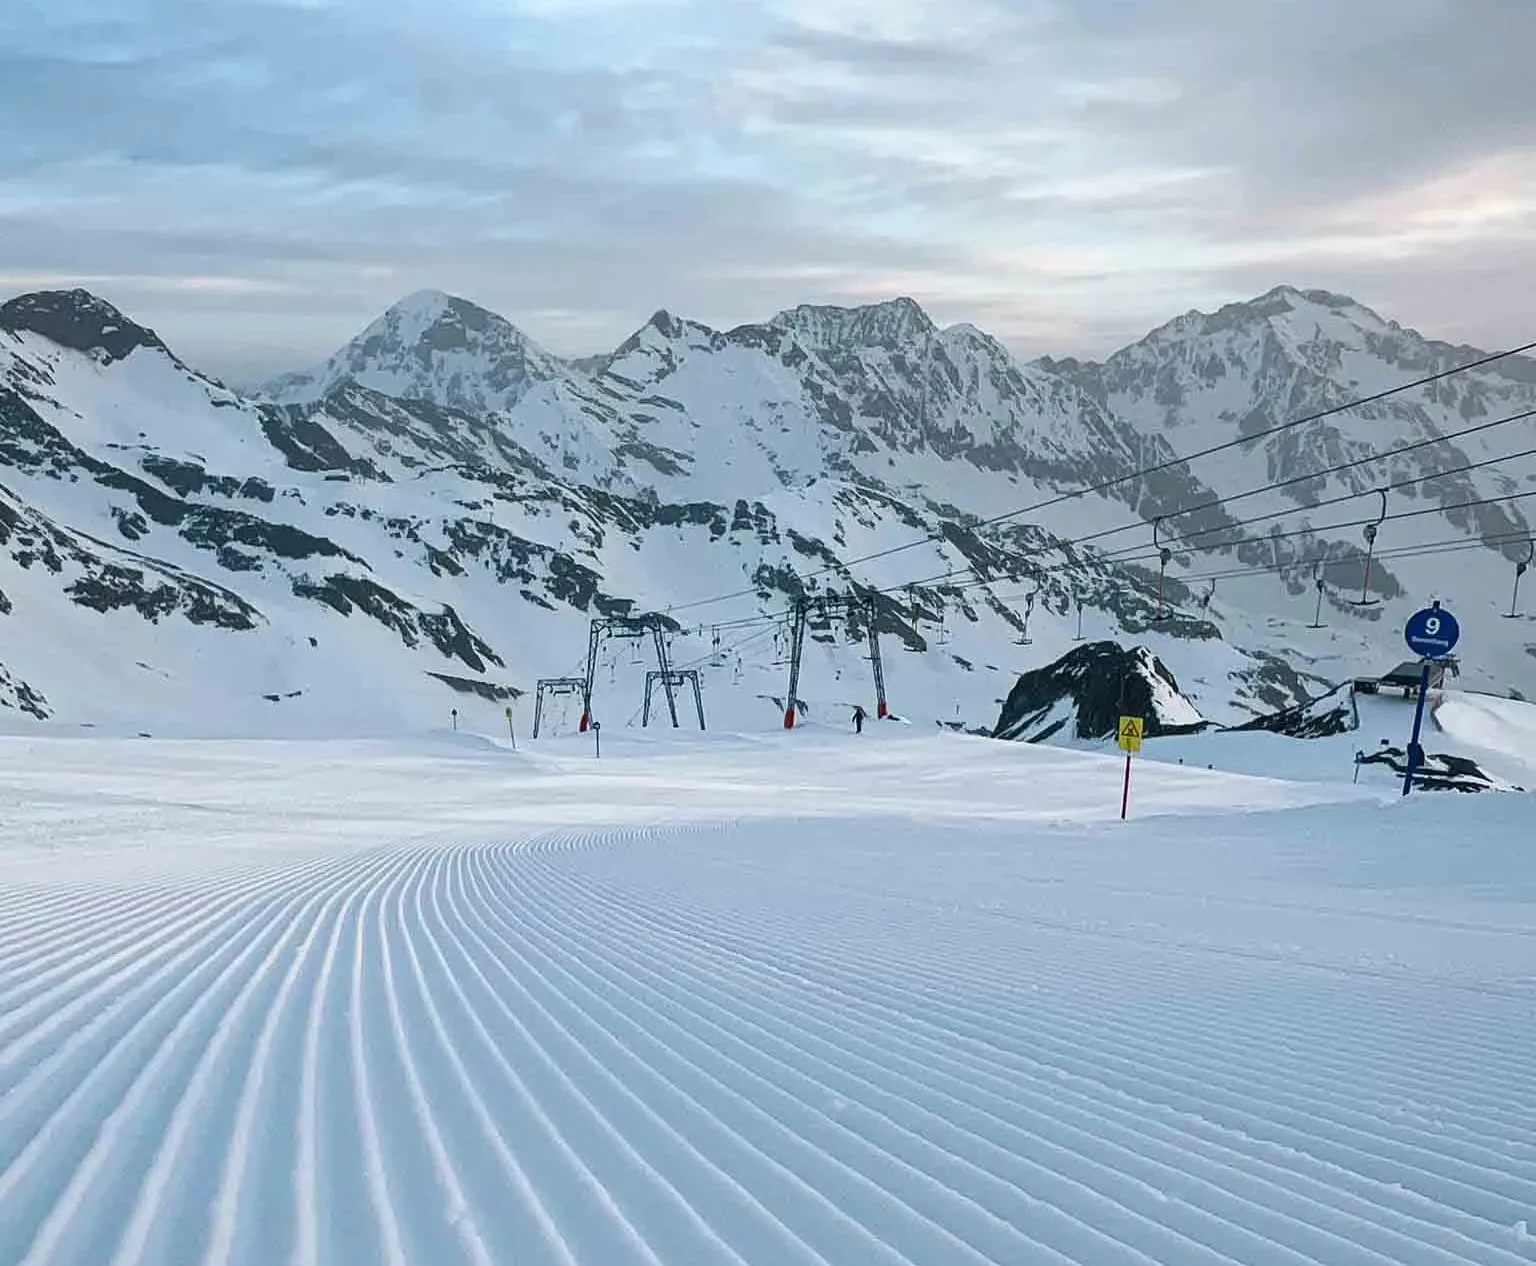 corduroy stripes of a newly pisted piste